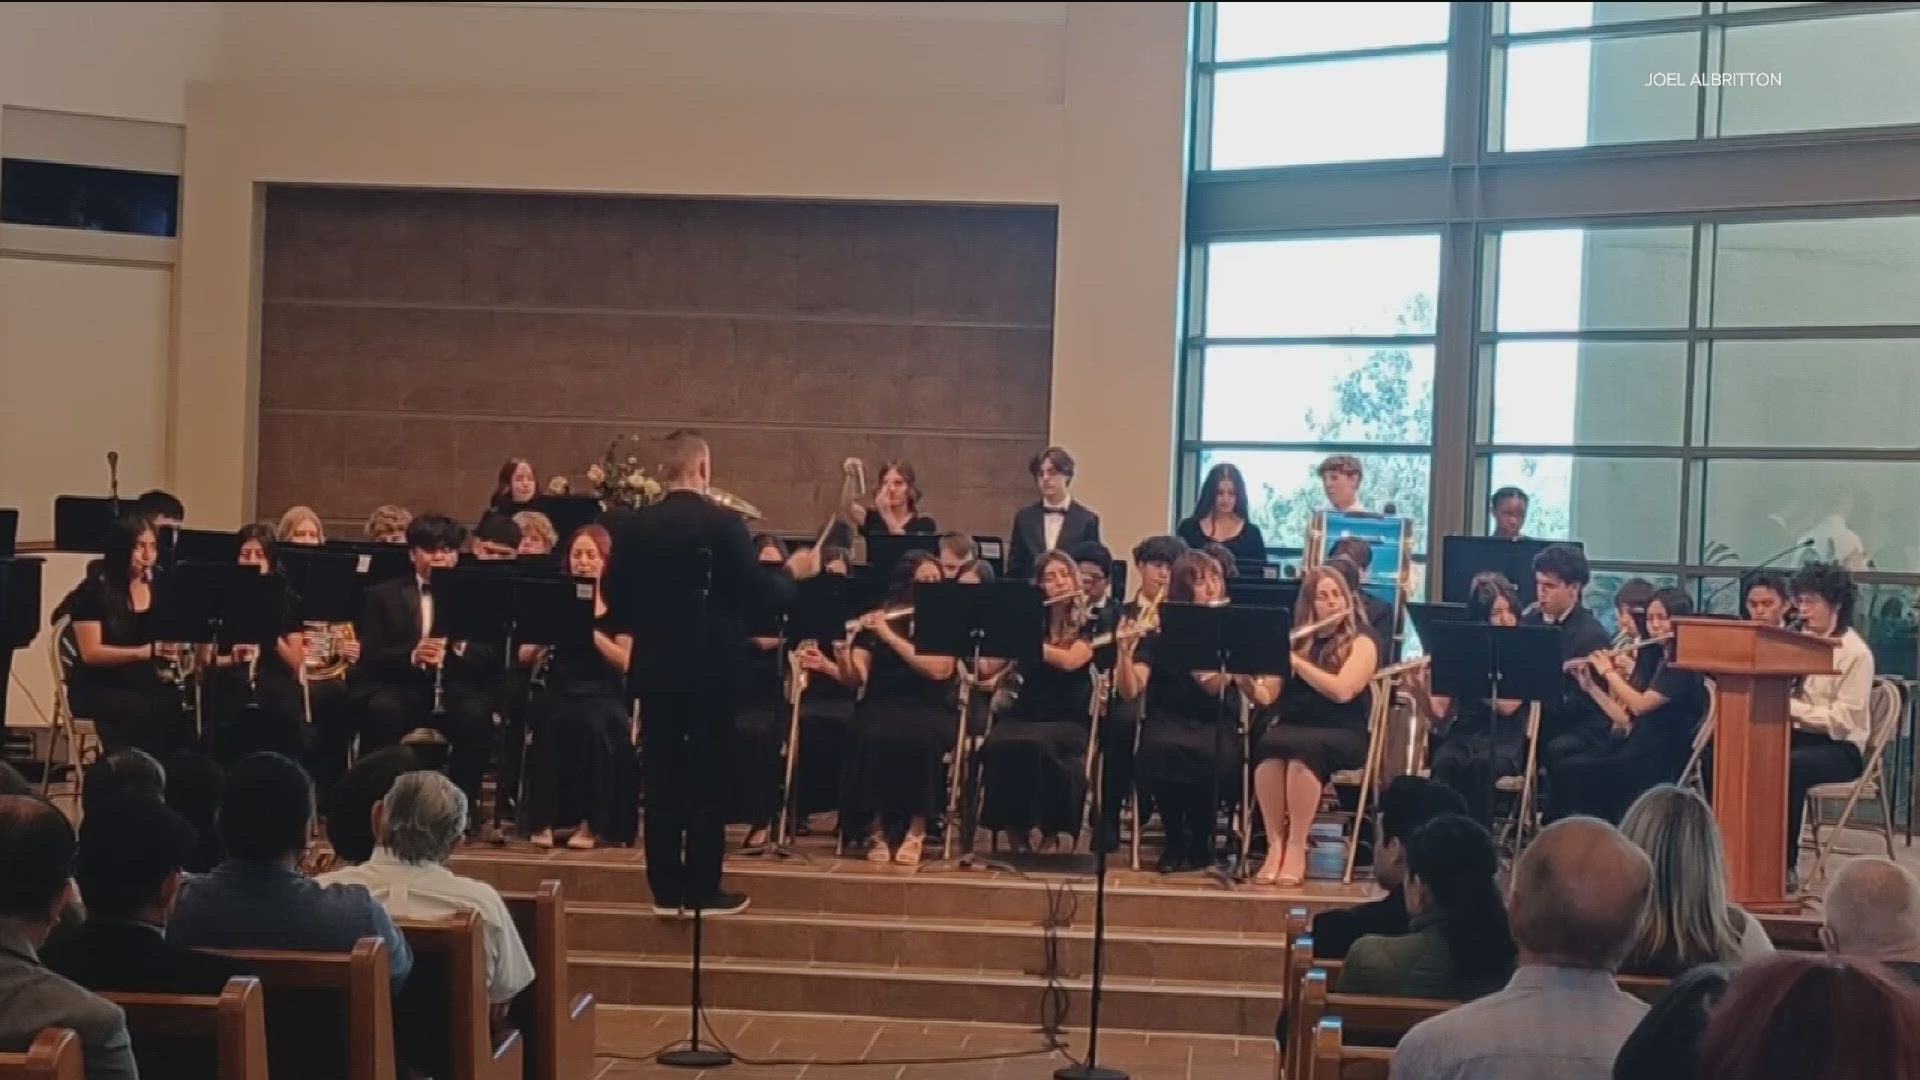 The Newbury Park Adventist Concert Band from Ventura woke up at their Chula Vista hotel to see most of their instruments had been stolen.